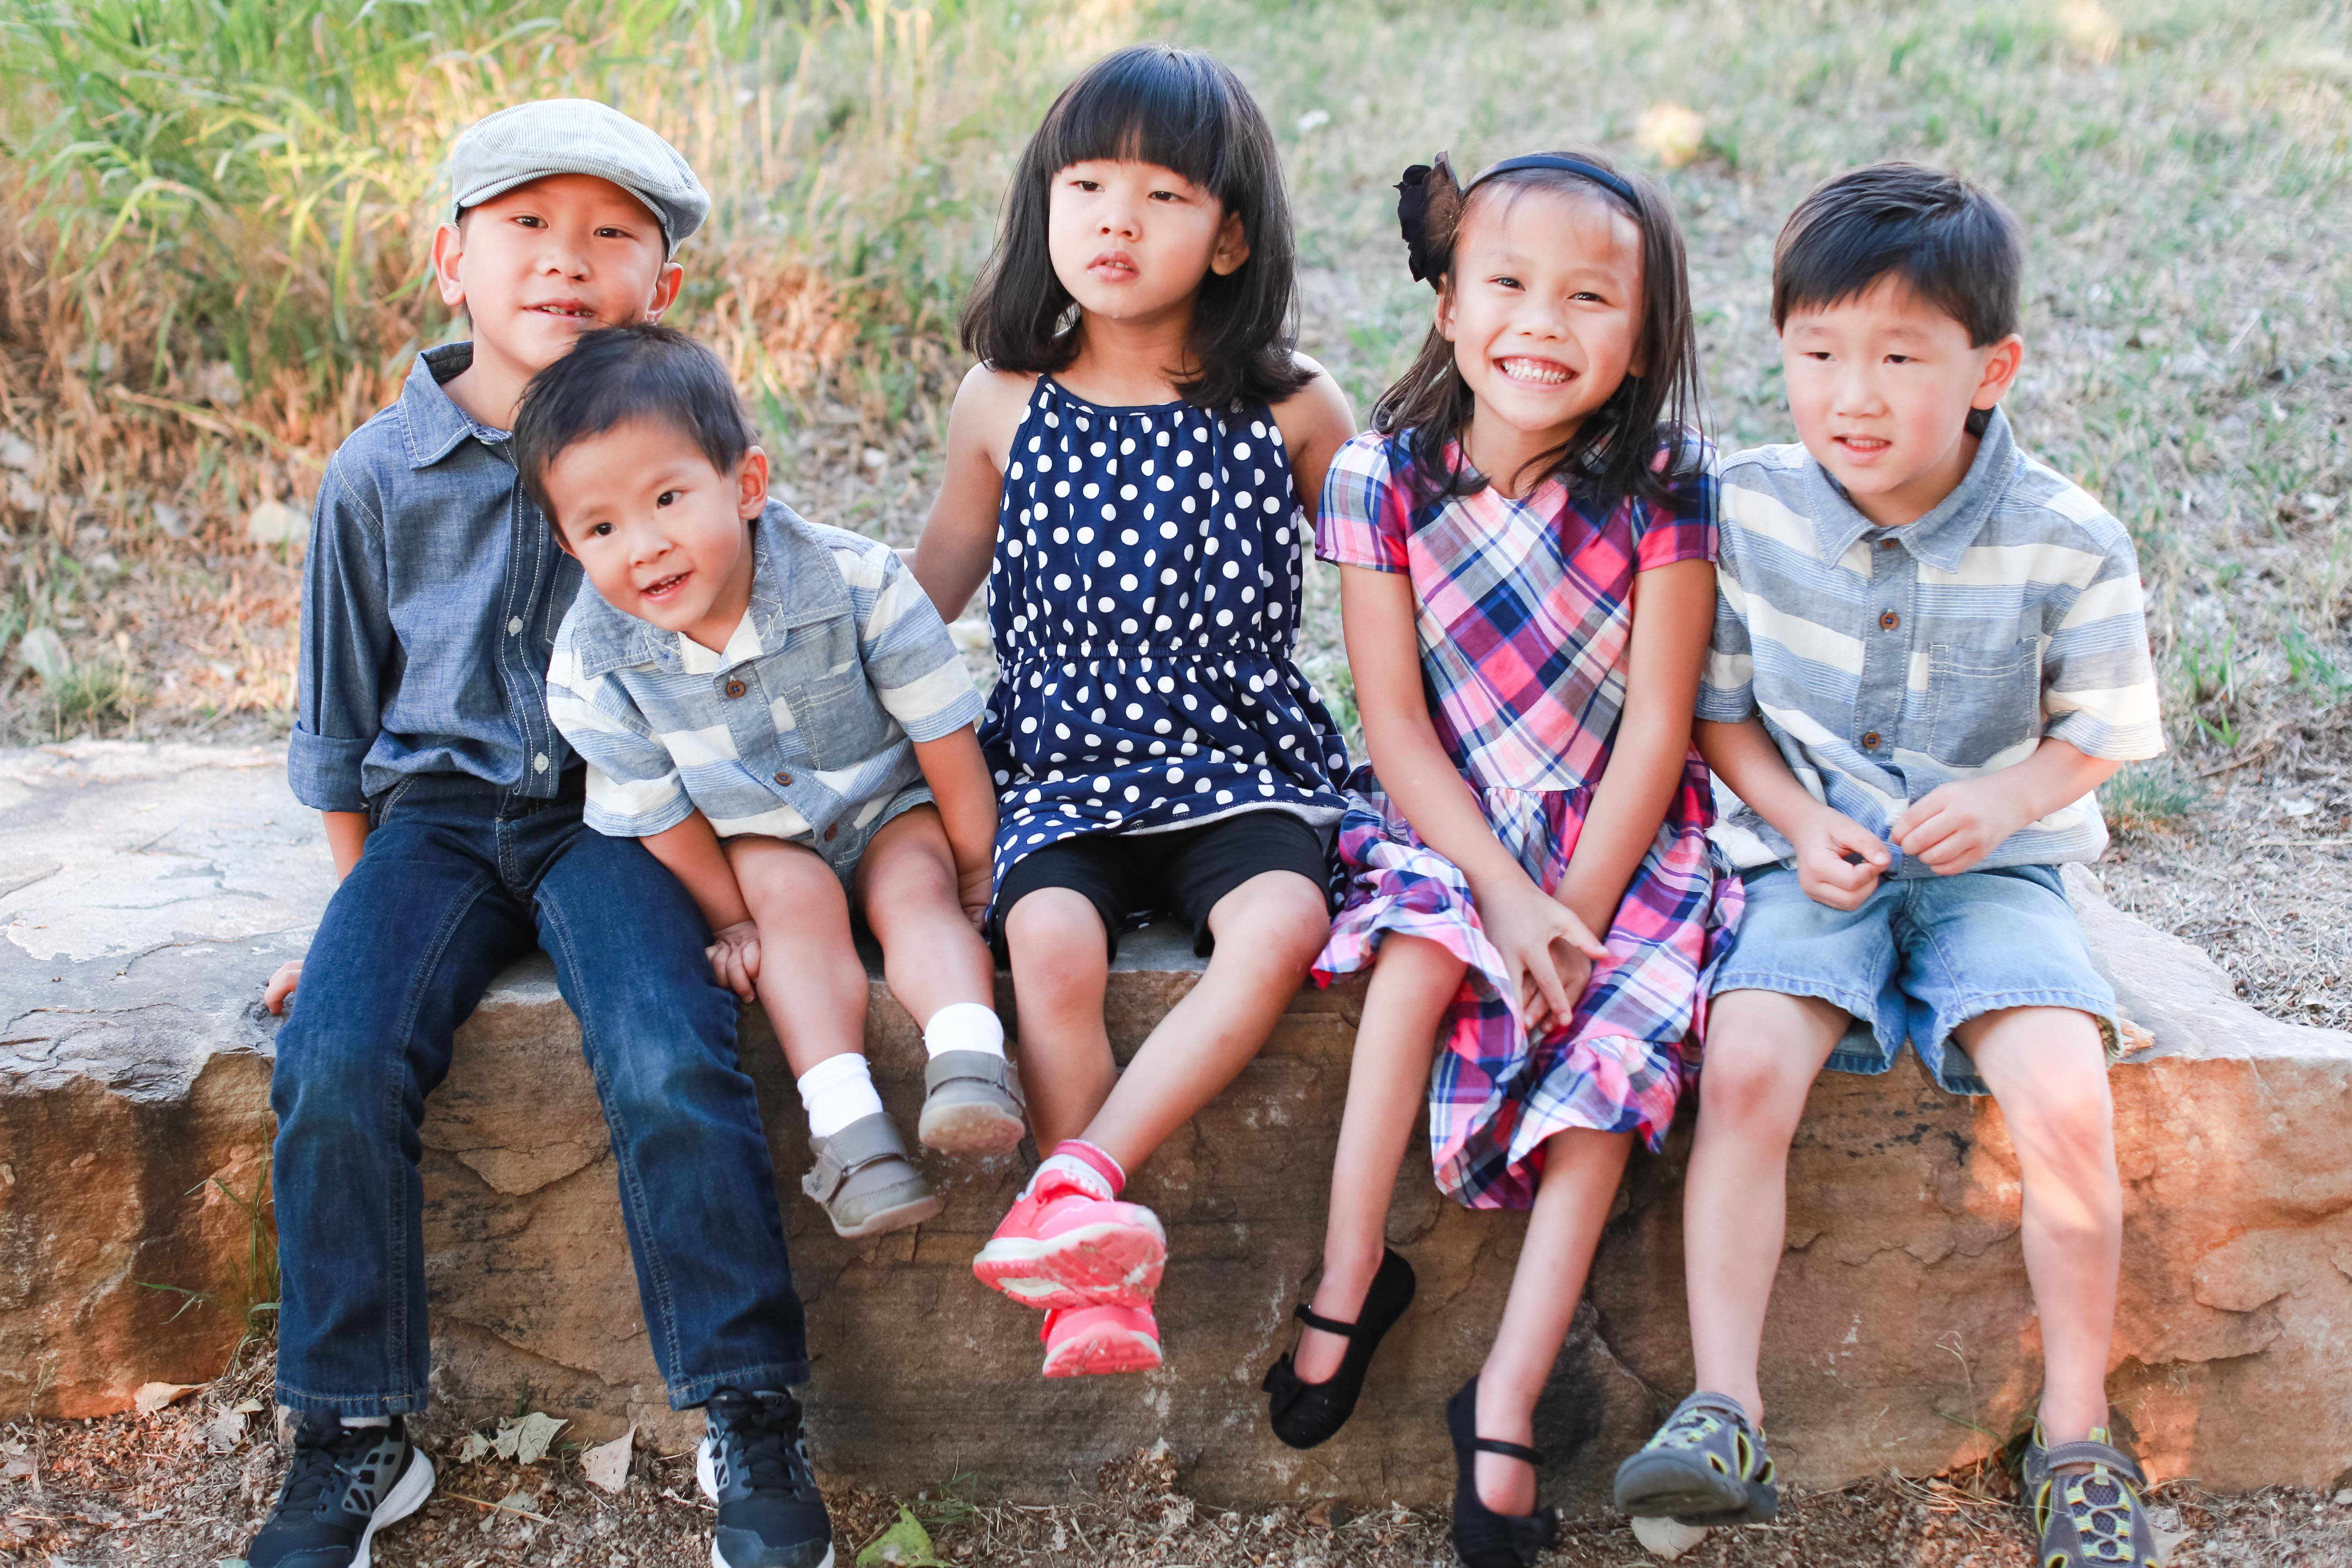 All together, the Downers adopted five children from China, all who have some sort of medical condition or permanent disability.